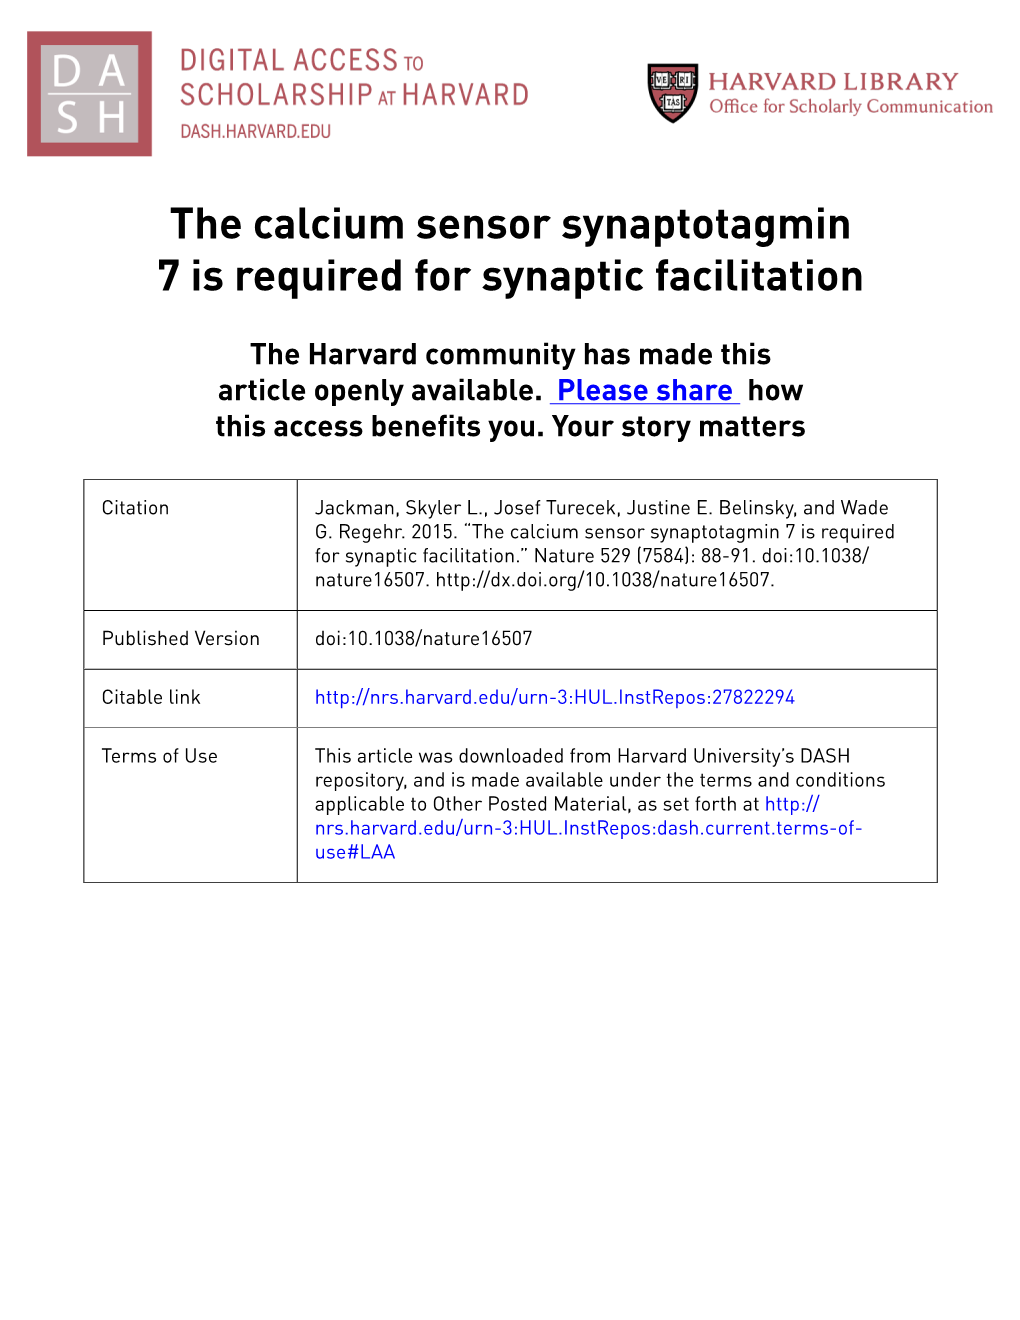 The Calcium Sensor Synaptotagmin 7 Is Required for Synaptic Facilitation